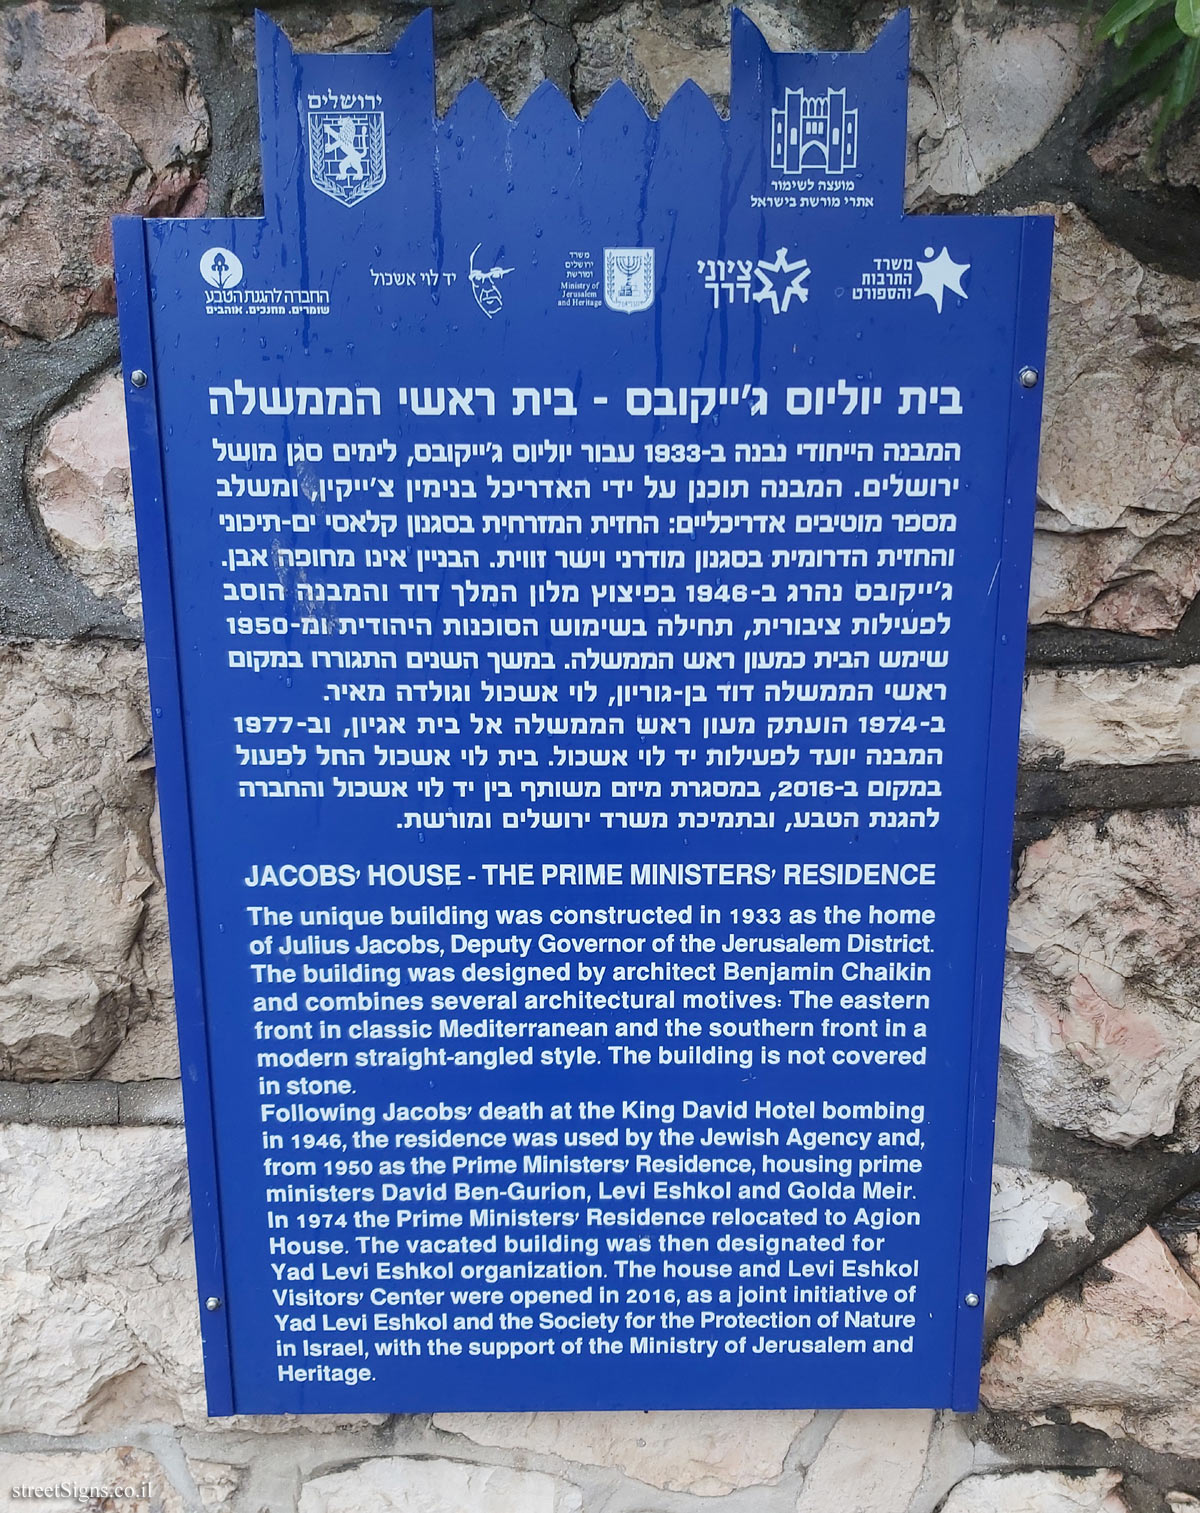 Jerusalem - Heritage Sites in Israel - Jacobs’ House - The Prime Ministers’ Residence